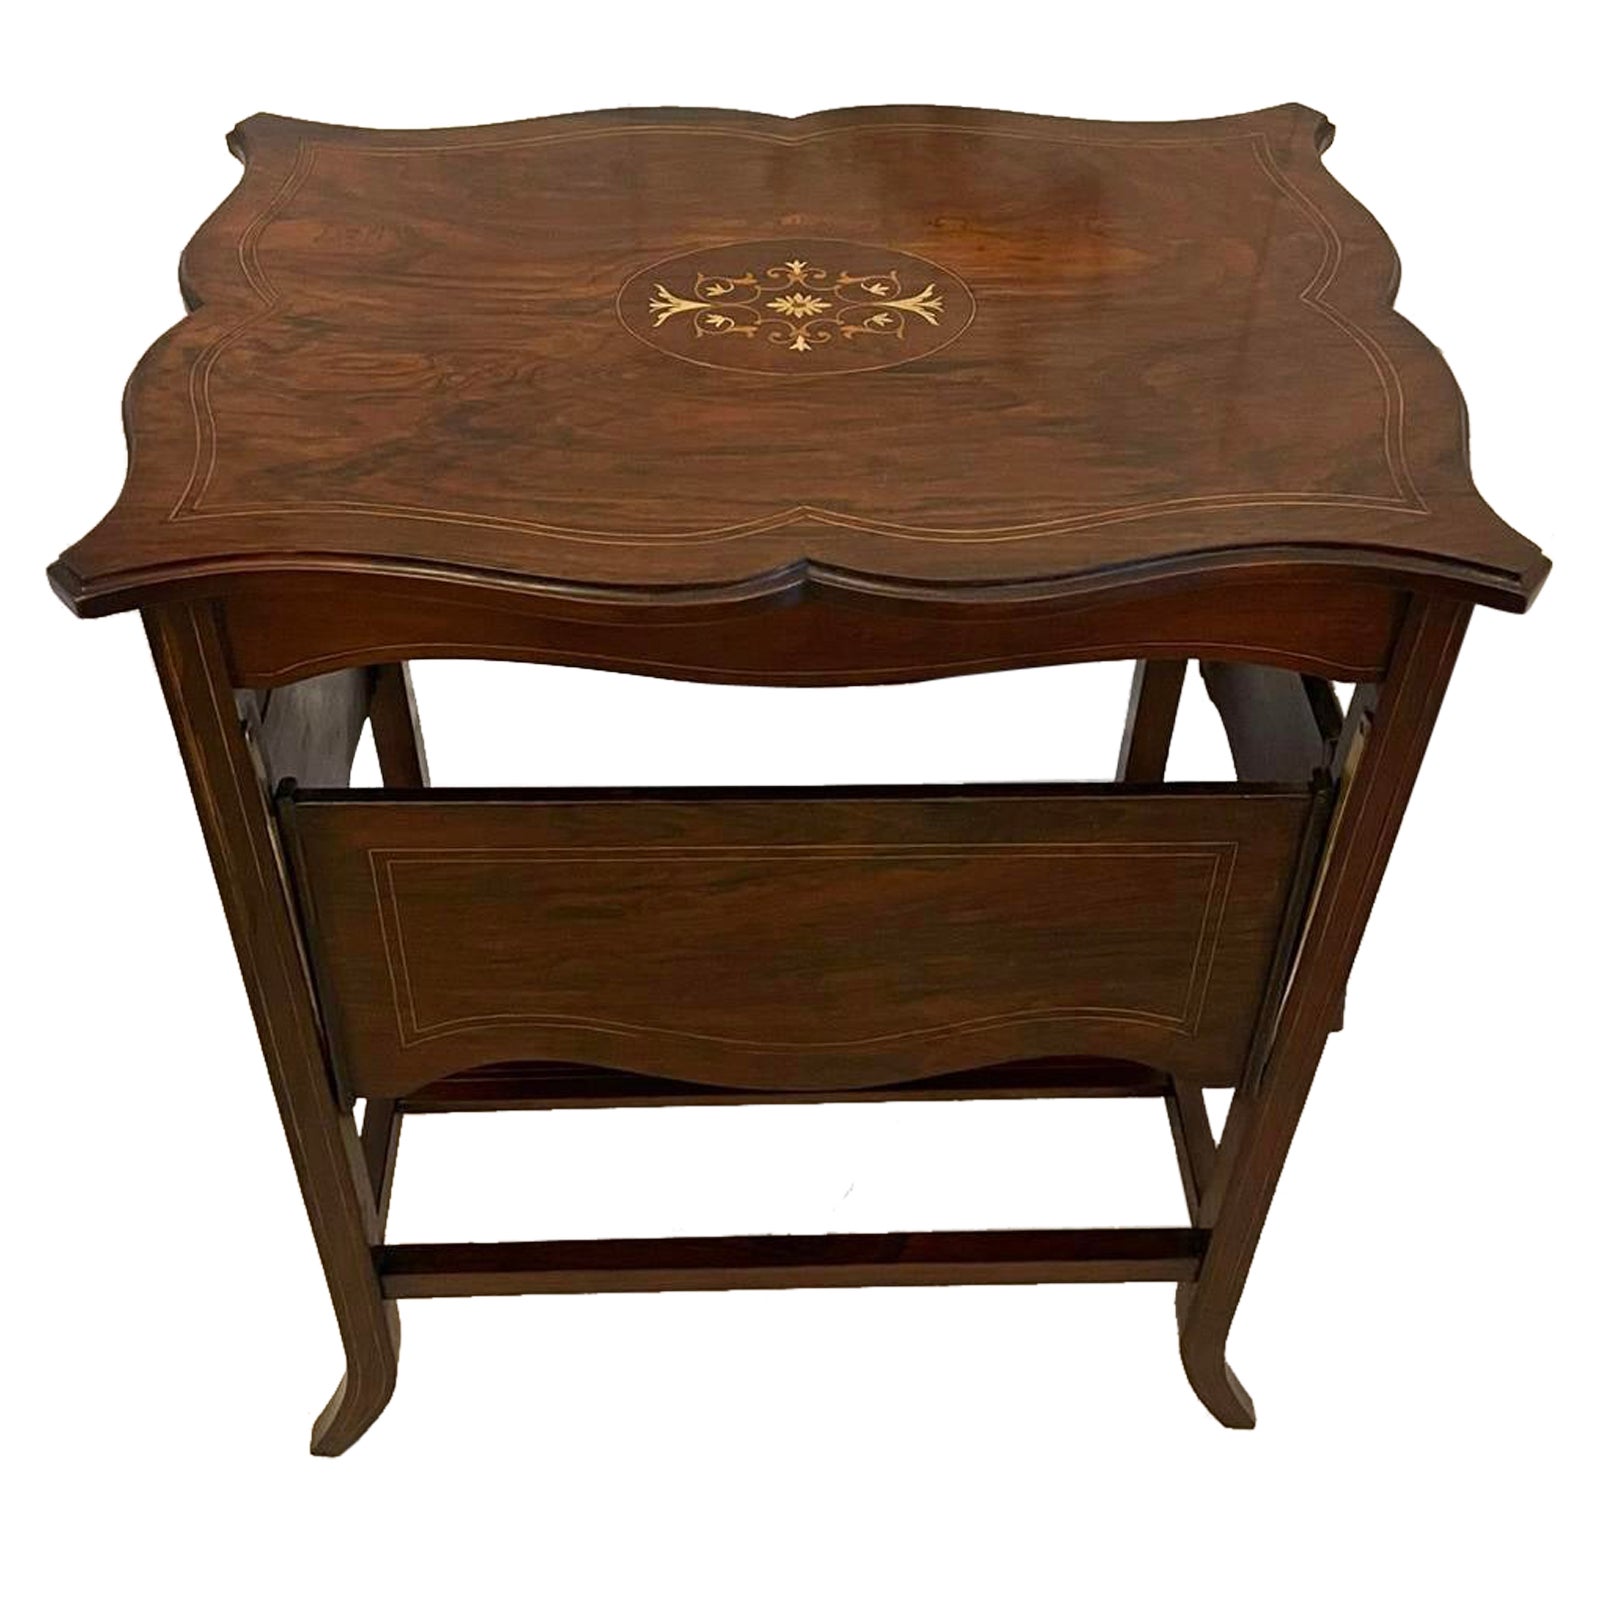 Unusual Antique Edwardian Inlaid Rosewood Centre/Side Table 